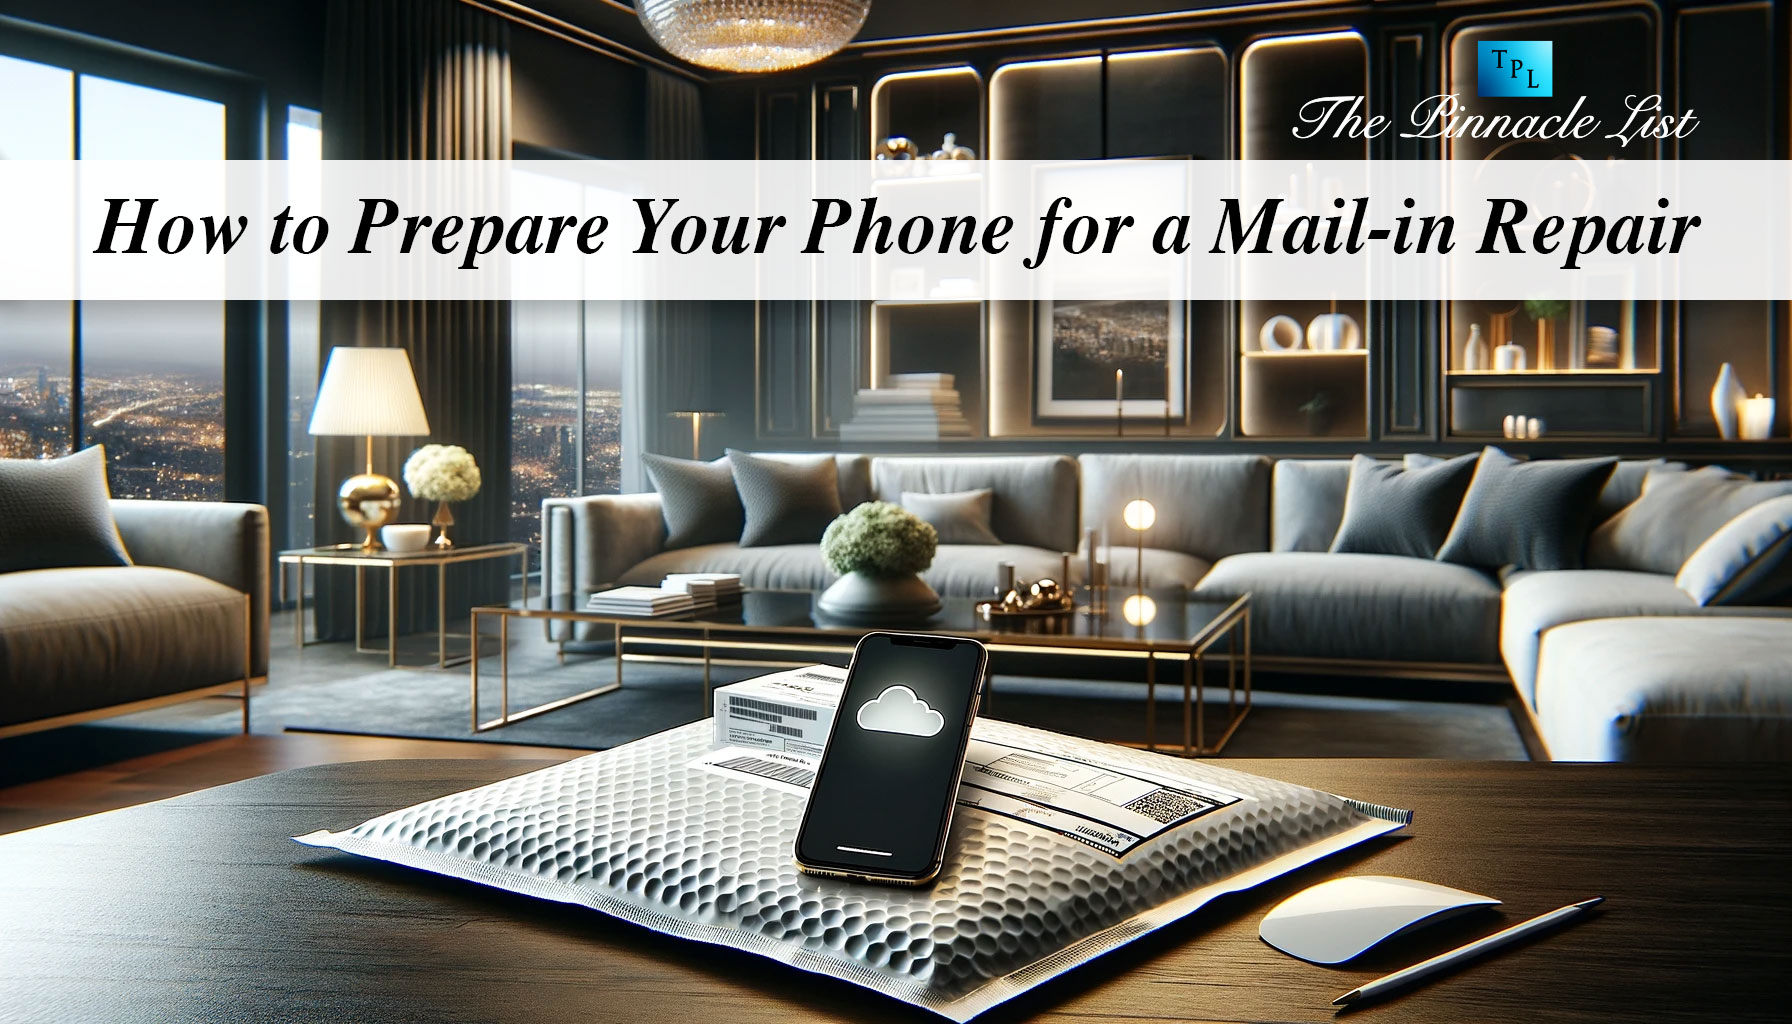 How to Prepare Your Phone for a Mail-in Repair